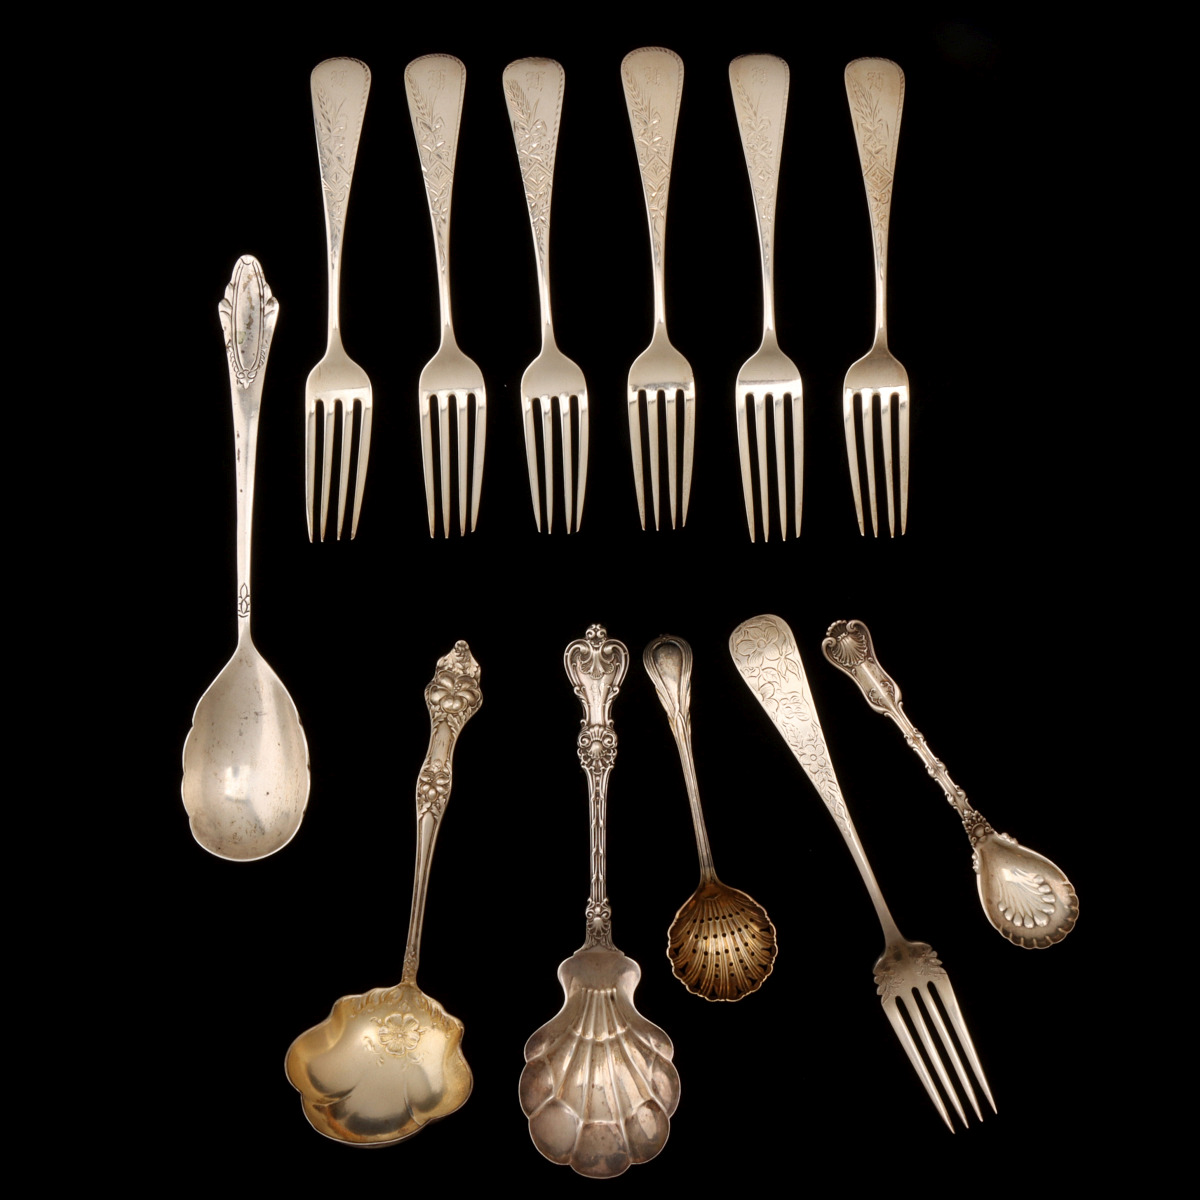 AN ESTATE COLLECTION OF STERLING FLATWARE